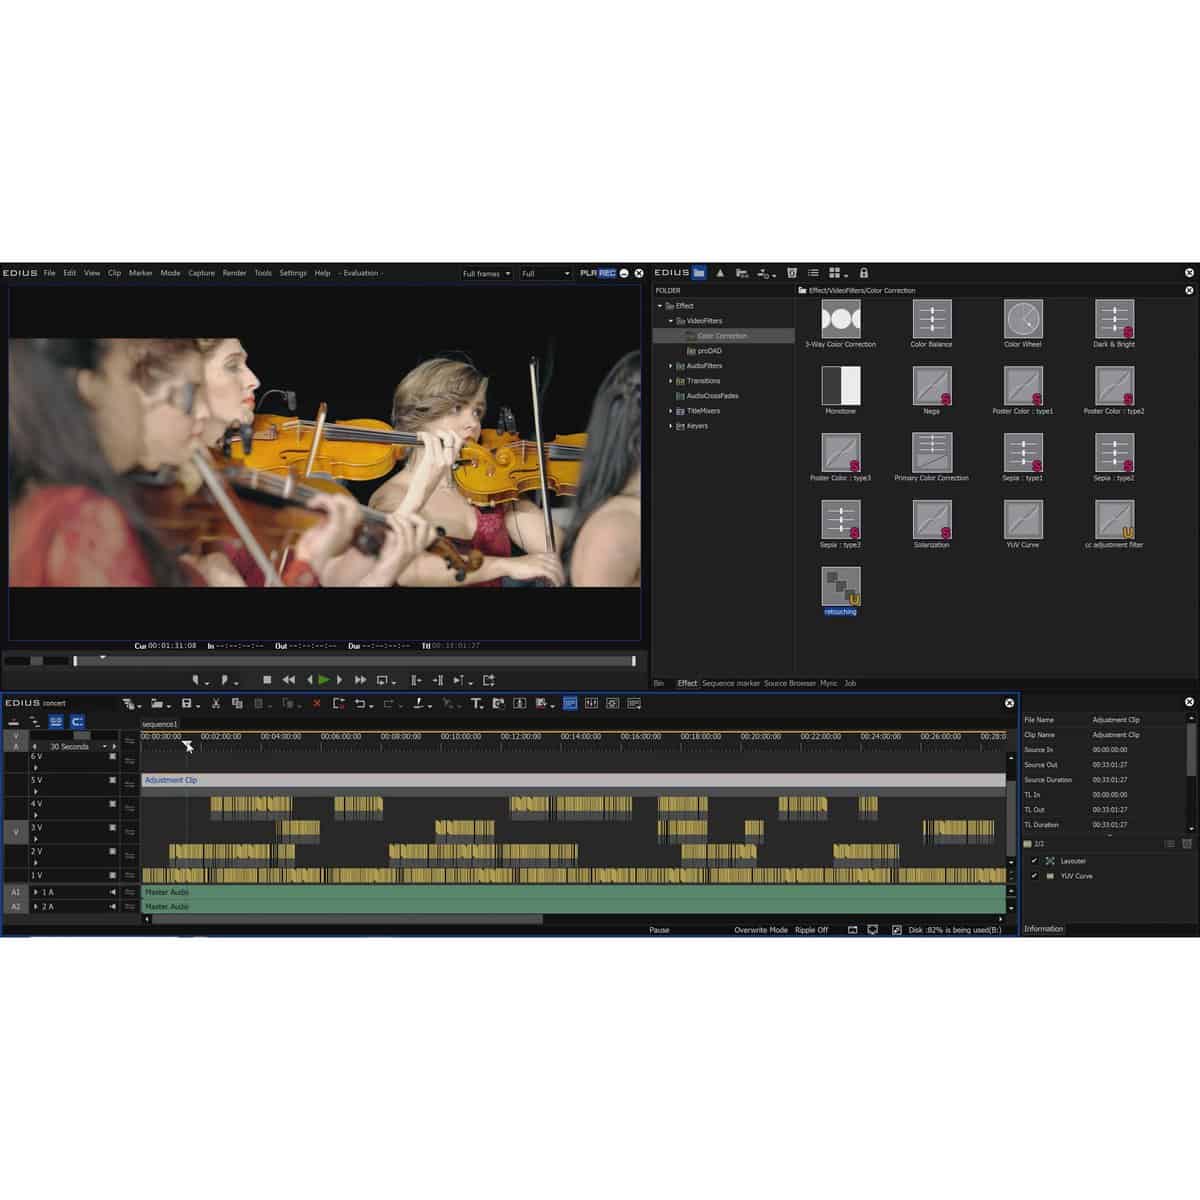 EDIUS 11 Workgroup Jump Upgrade Second License Video Editing Software, Download Only